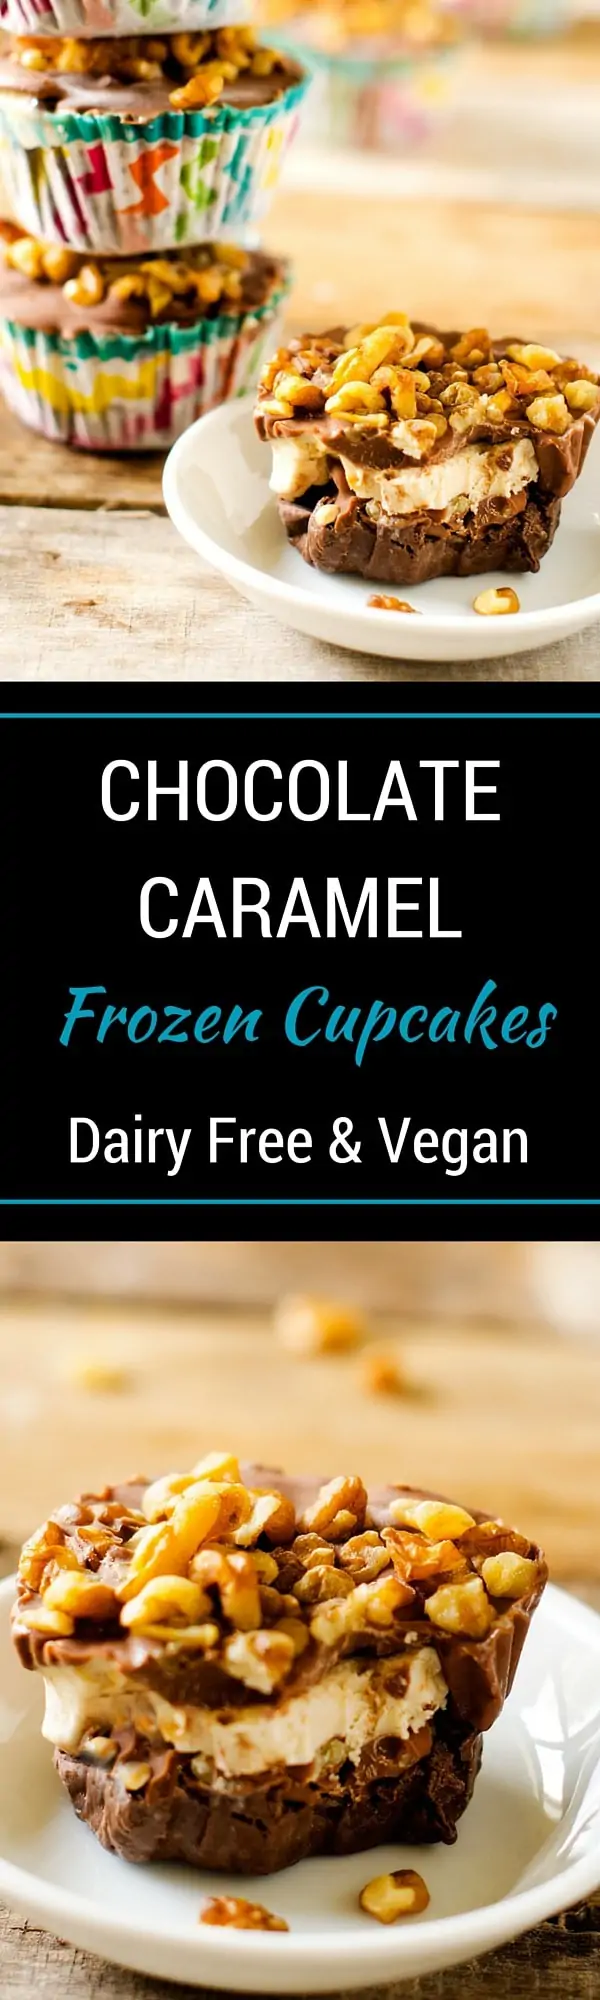 Vegan Chocolate & Salted Caramel Frozen Cupcakes - These frozen cupcakes are so delicious. Seriously my favorite dessert ever. Hard to believe they are vegan and gluten free. - WendyPolisi.com